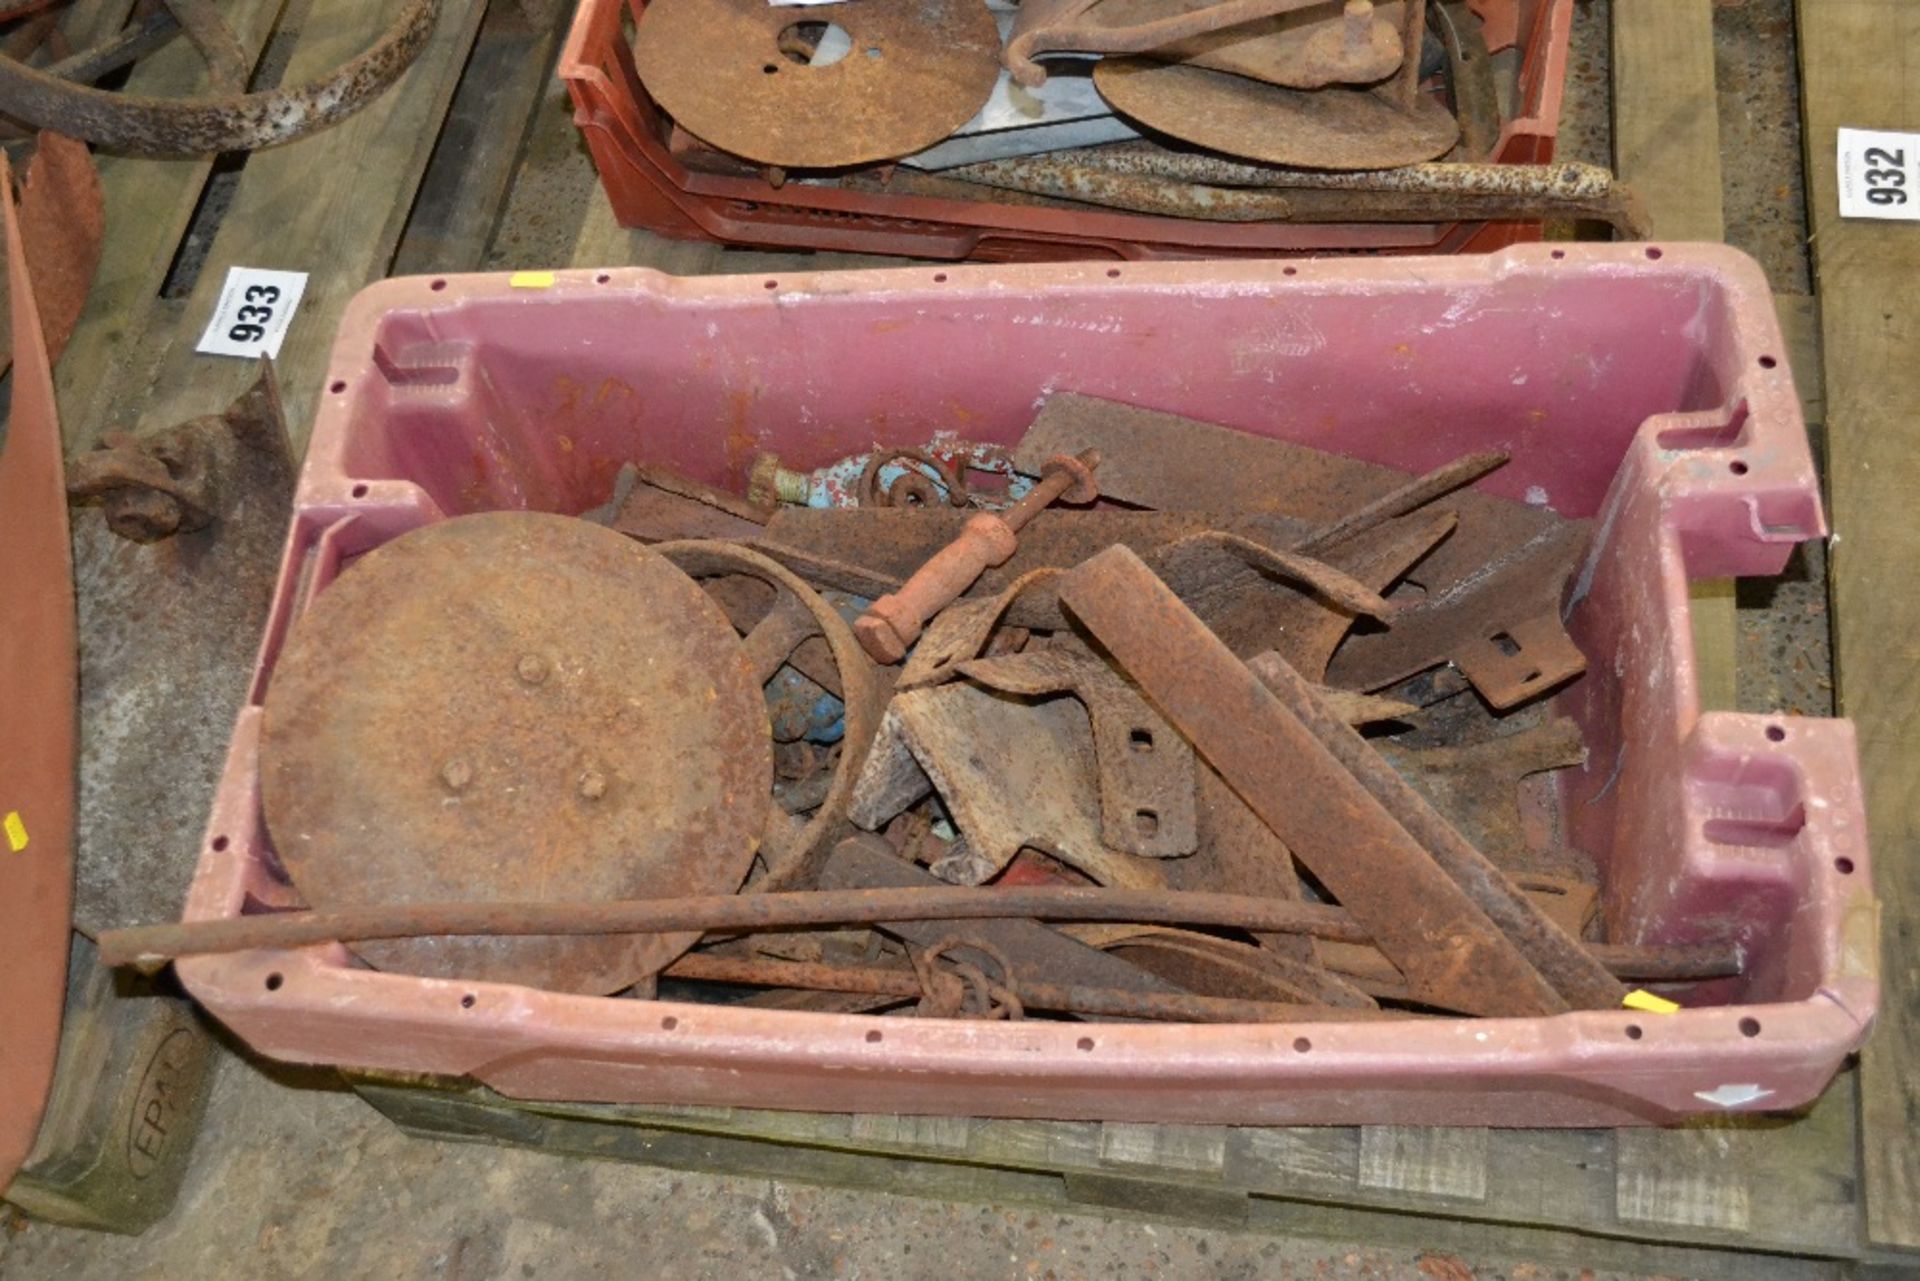 A quantity of spare parts for Ransomes horse ploughs to include points, coulters, horse-drawn - Image 2 of 3